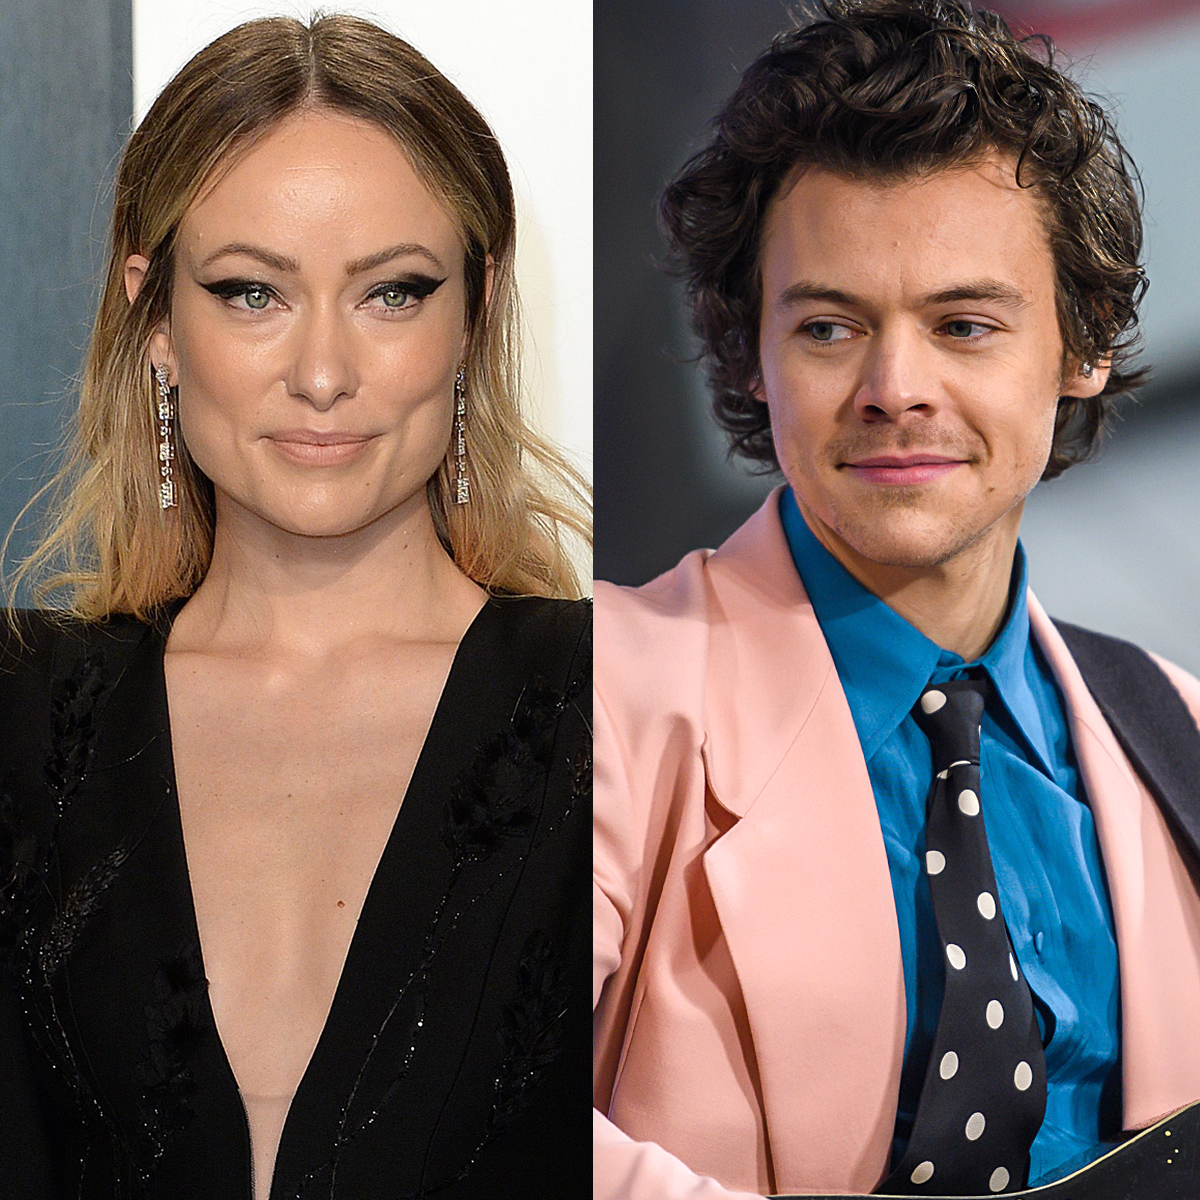 Best Echo Dot Harry Styles And Olivia Wilde Engaged Article Olivia Wilde S Riotous Love Life